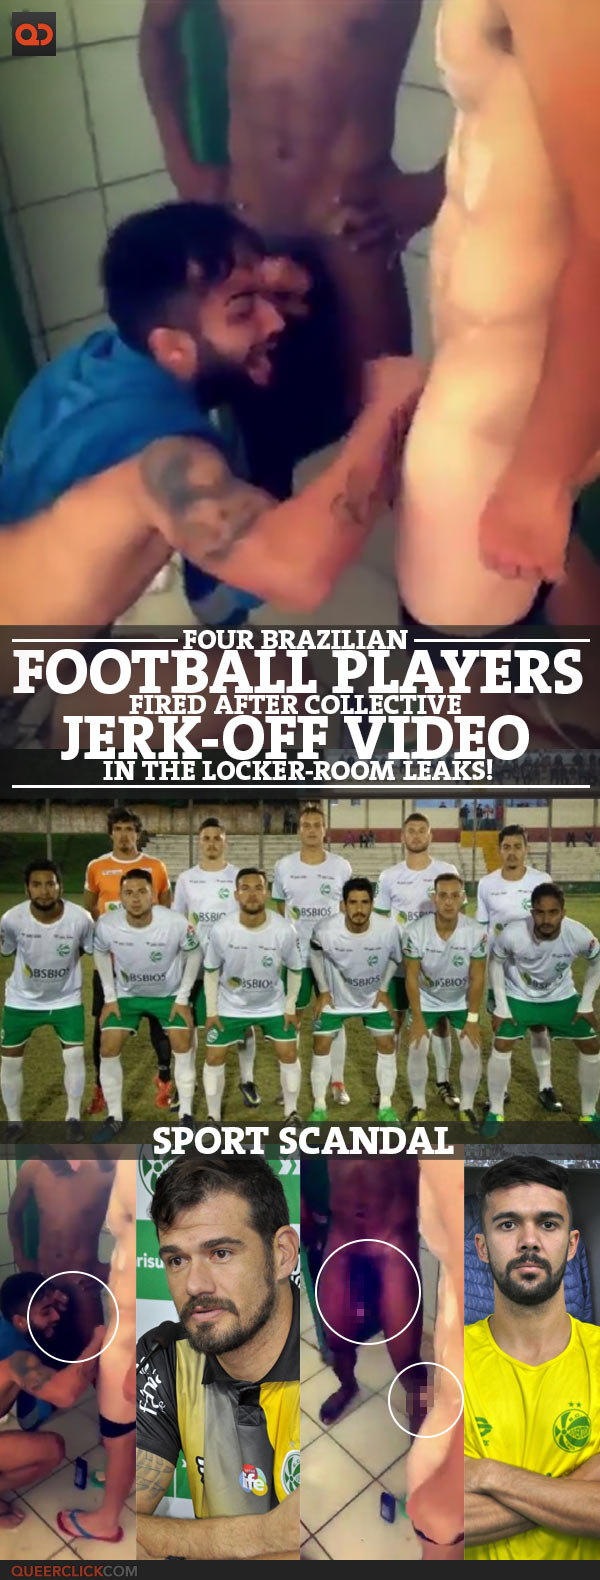 Four Brazilian Football Players Fired After Collective Jerk-Off Video In The Locker Room Leaks!